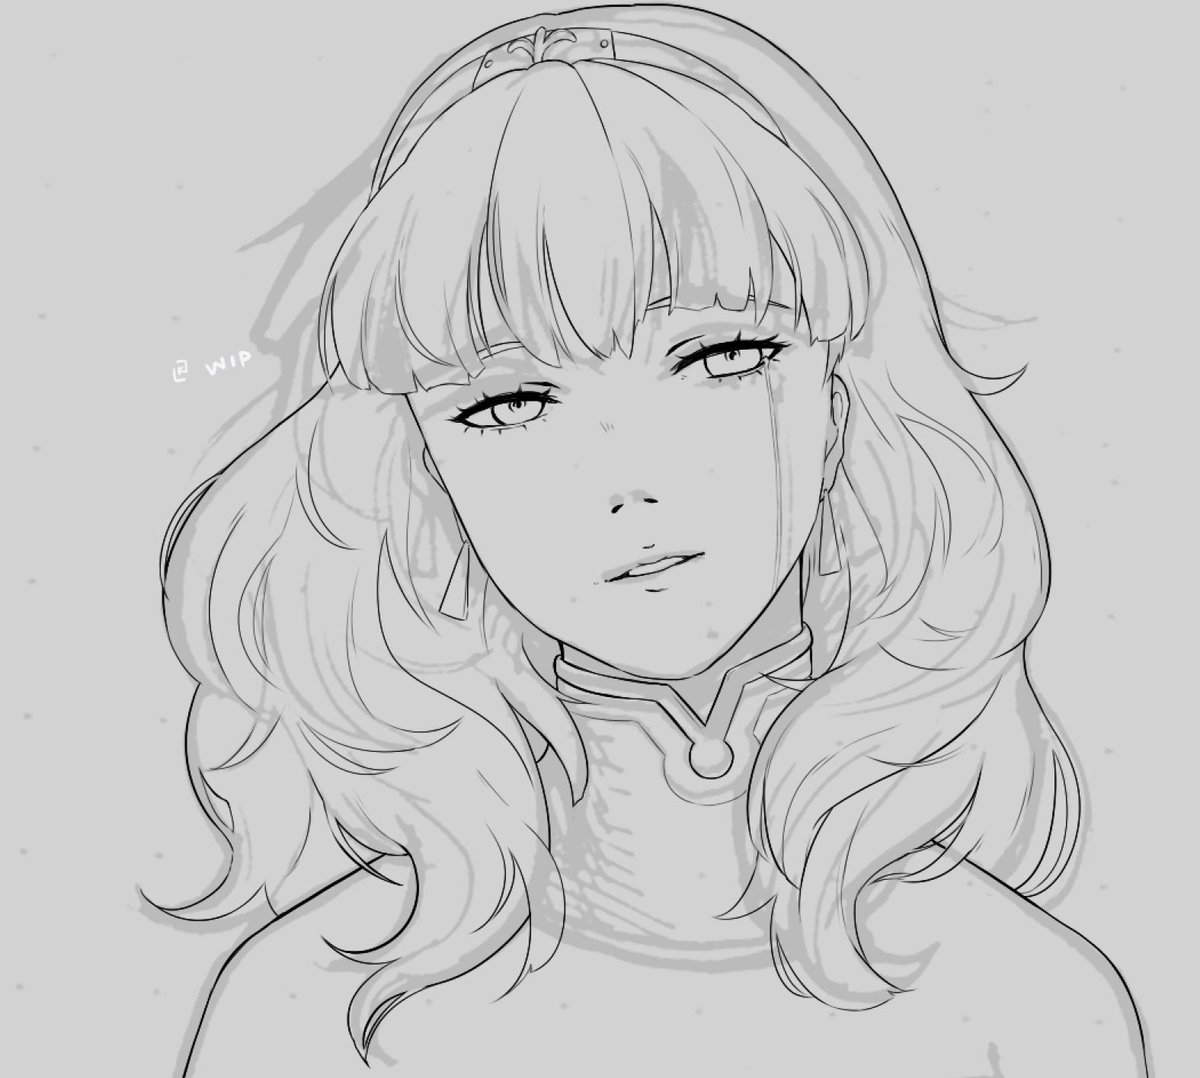 buckle up kids we're going to get real sad soon #fireemblemechoes #celica #wip 